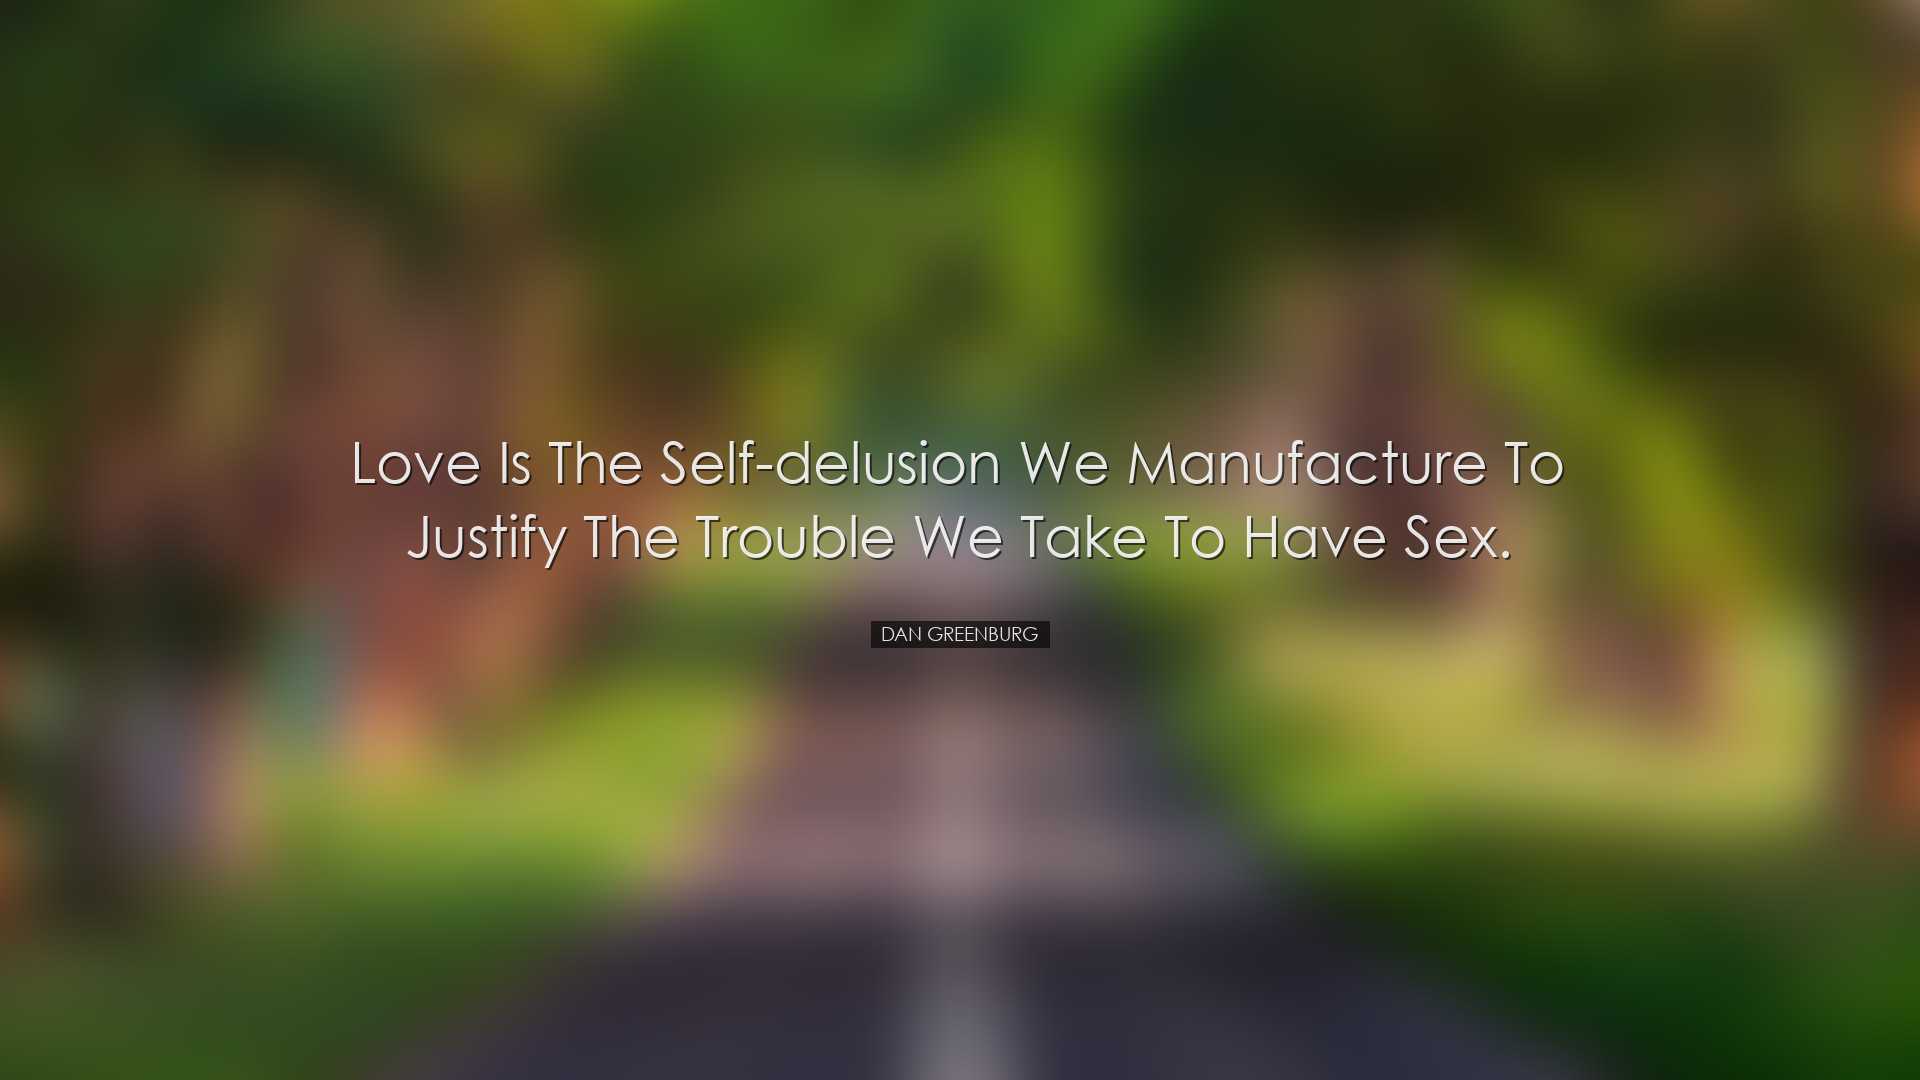 Love is the self-delusion we manufacture to justify the trouble we